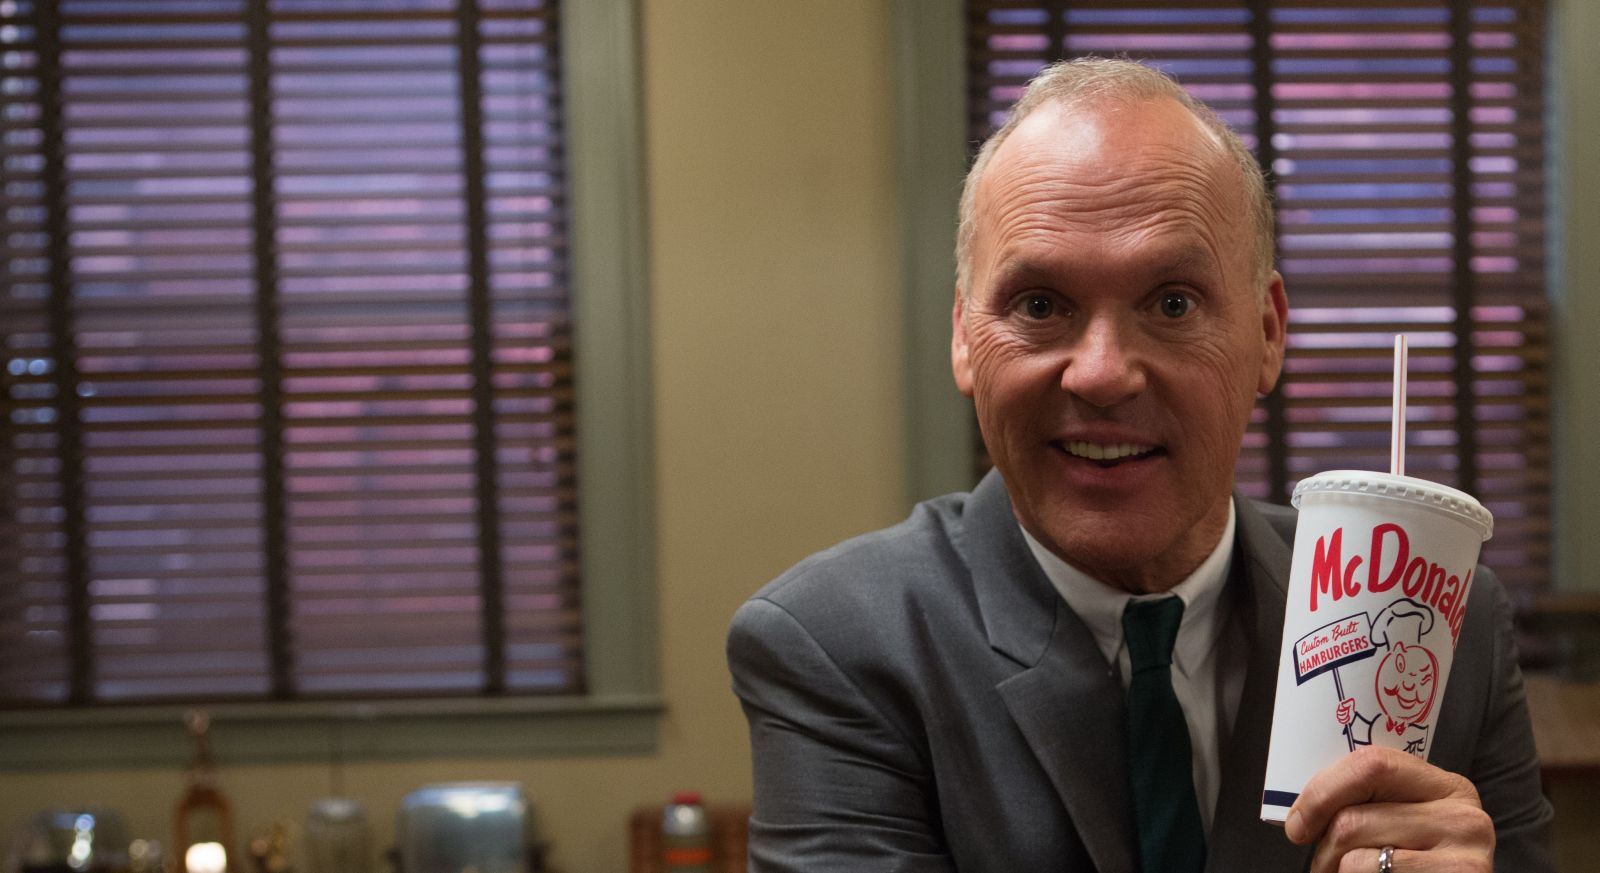 Michael Keaton in "The Founder" (2016)